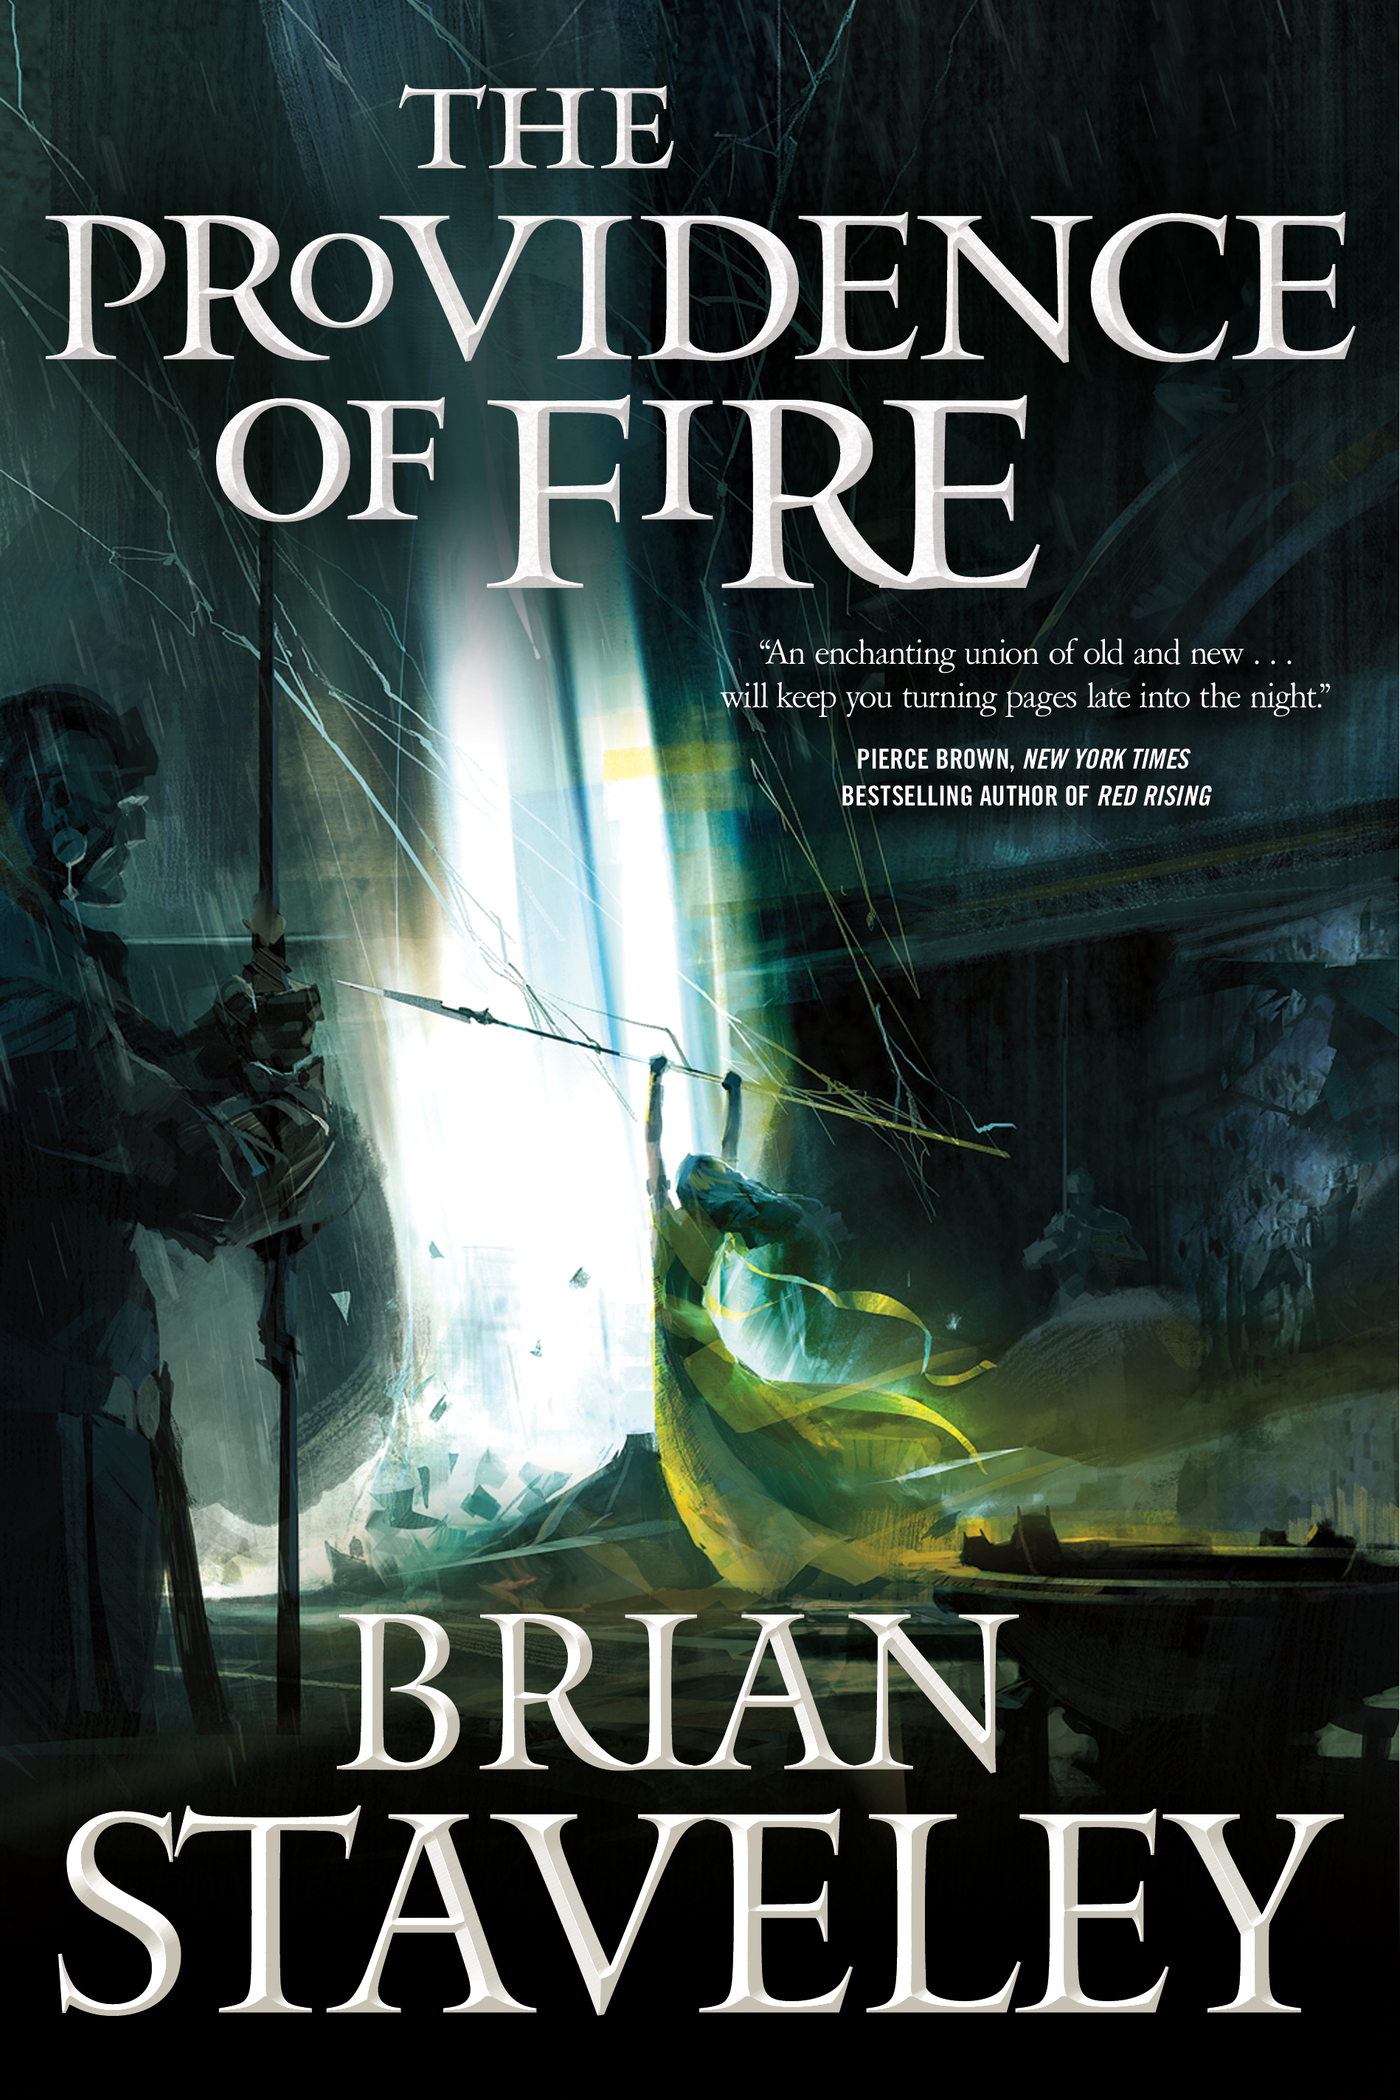 The Providence of Fire : Chronicle of the Unhewn Throne, Book II by Brian Staveley